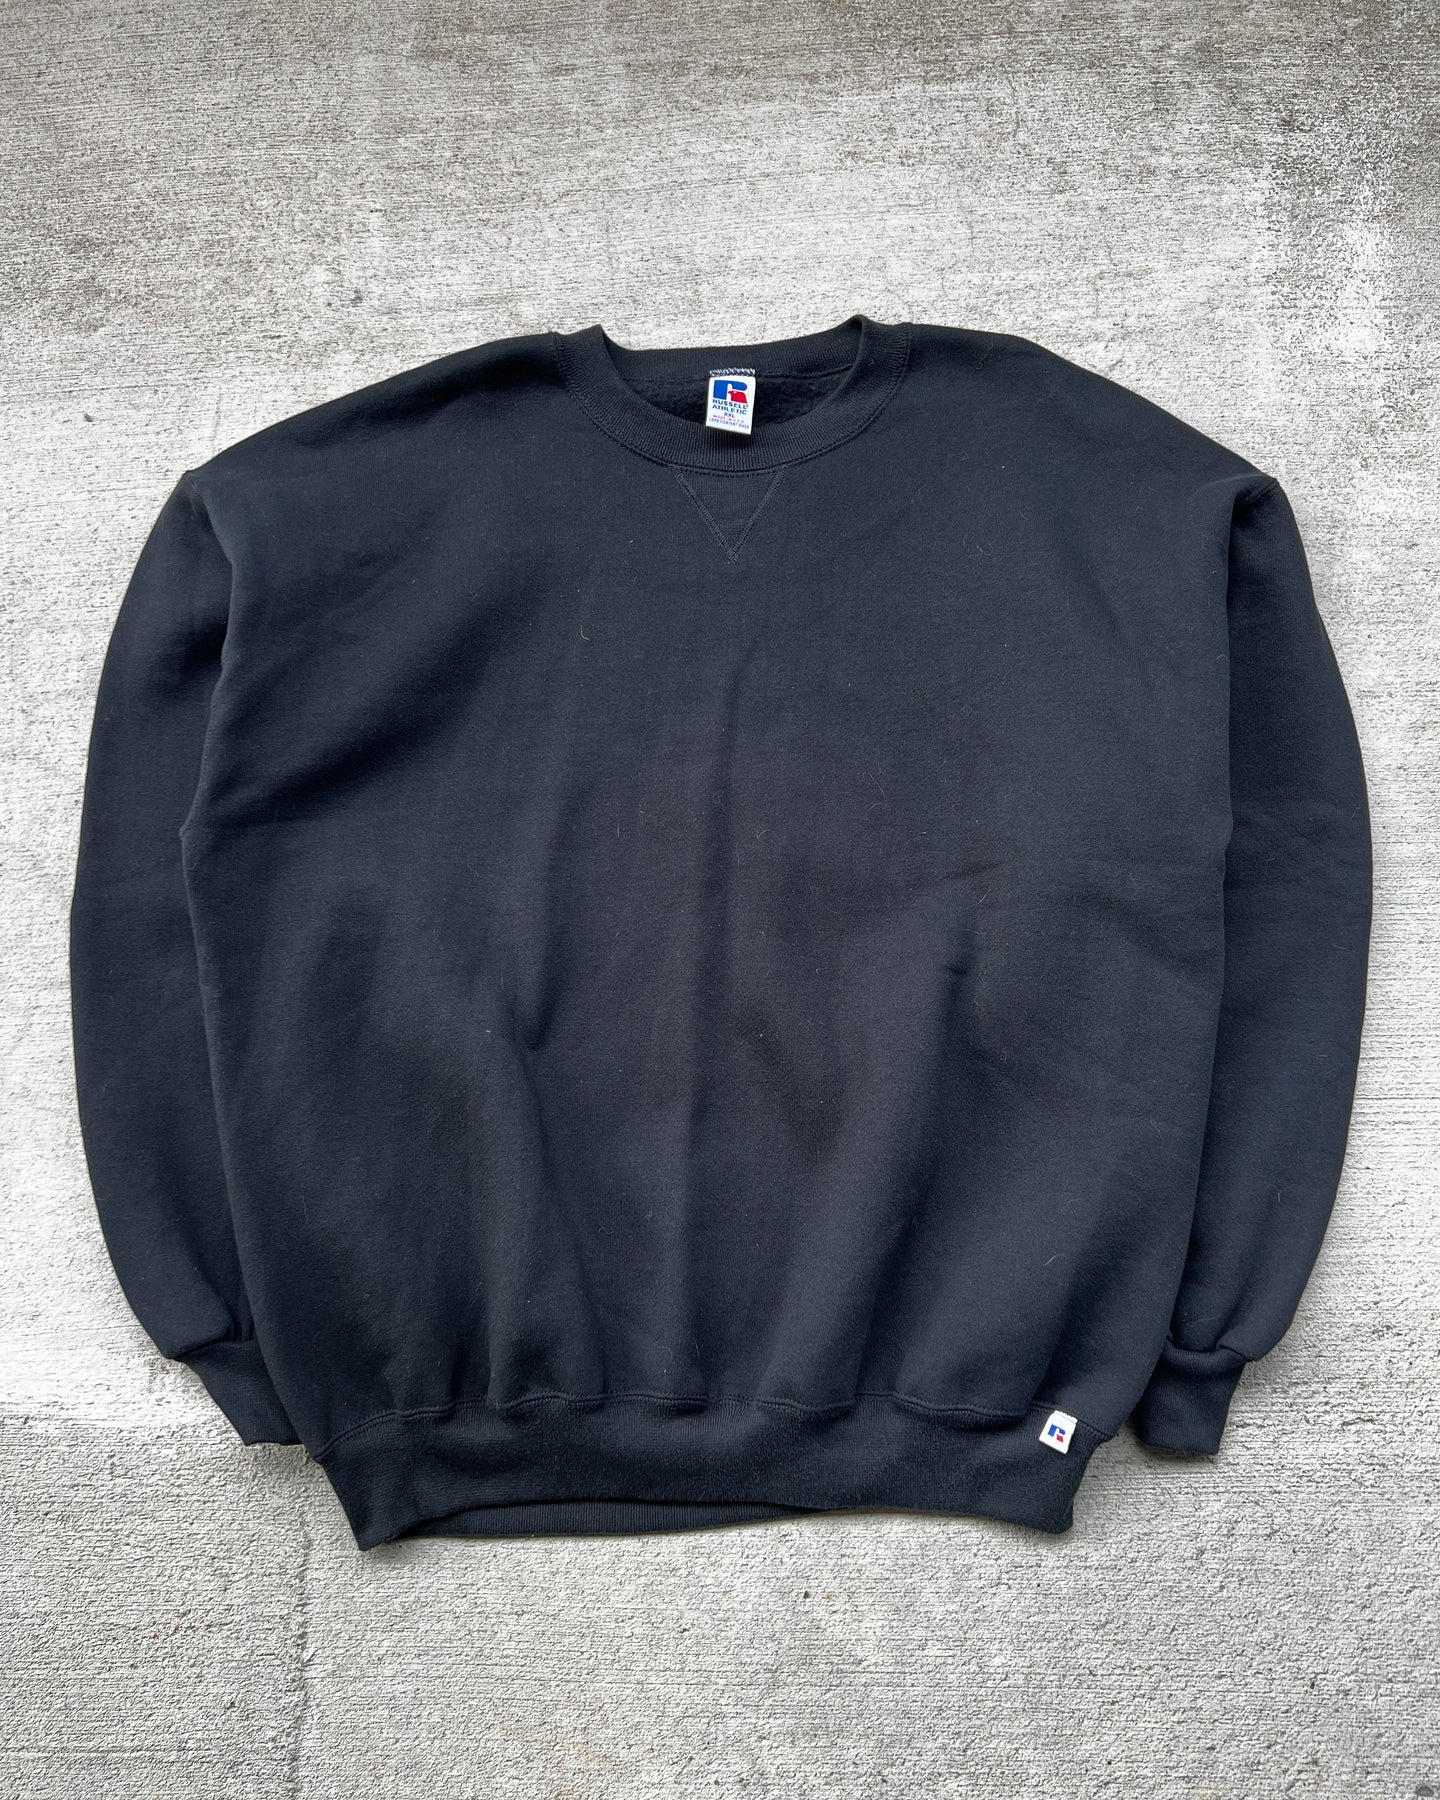 1990s Russell Black Crewneck - Size XX-Large